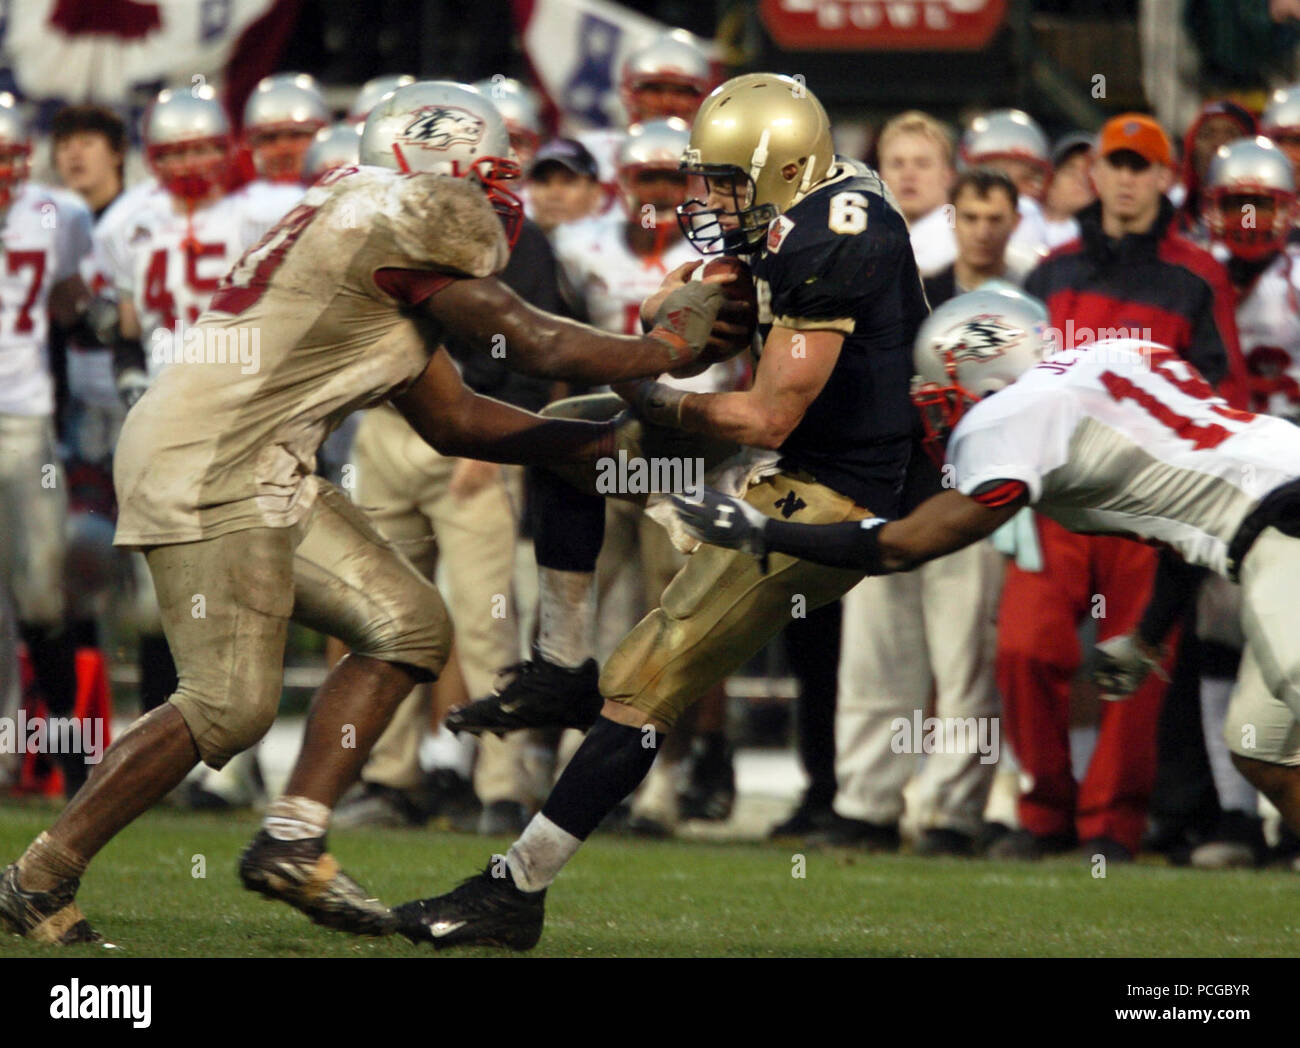 Francisco, Calif. (Dec. 29, 2004) U.S. Naval Academy Midshipman 1st Class Aaron Polanco catches a pass from slot back Frank Divis in the 4th quarter of play against the Lobos of New Mexico at the Emerald Bowl in San Francisco.  Polanco passed for 102 yards and a touchdown and rushed for 133 yards and three more scores for the Midshipmen (10-2)  The Senior quarterback was 3-of-6 passing with 26 rushes, also caught two passes for 23 yards. Navy triumphed over New Mexico 34-19 for their first bowl win since 1996 and first 10 game winning record in 99 years. U.S. Navy Stock Photo